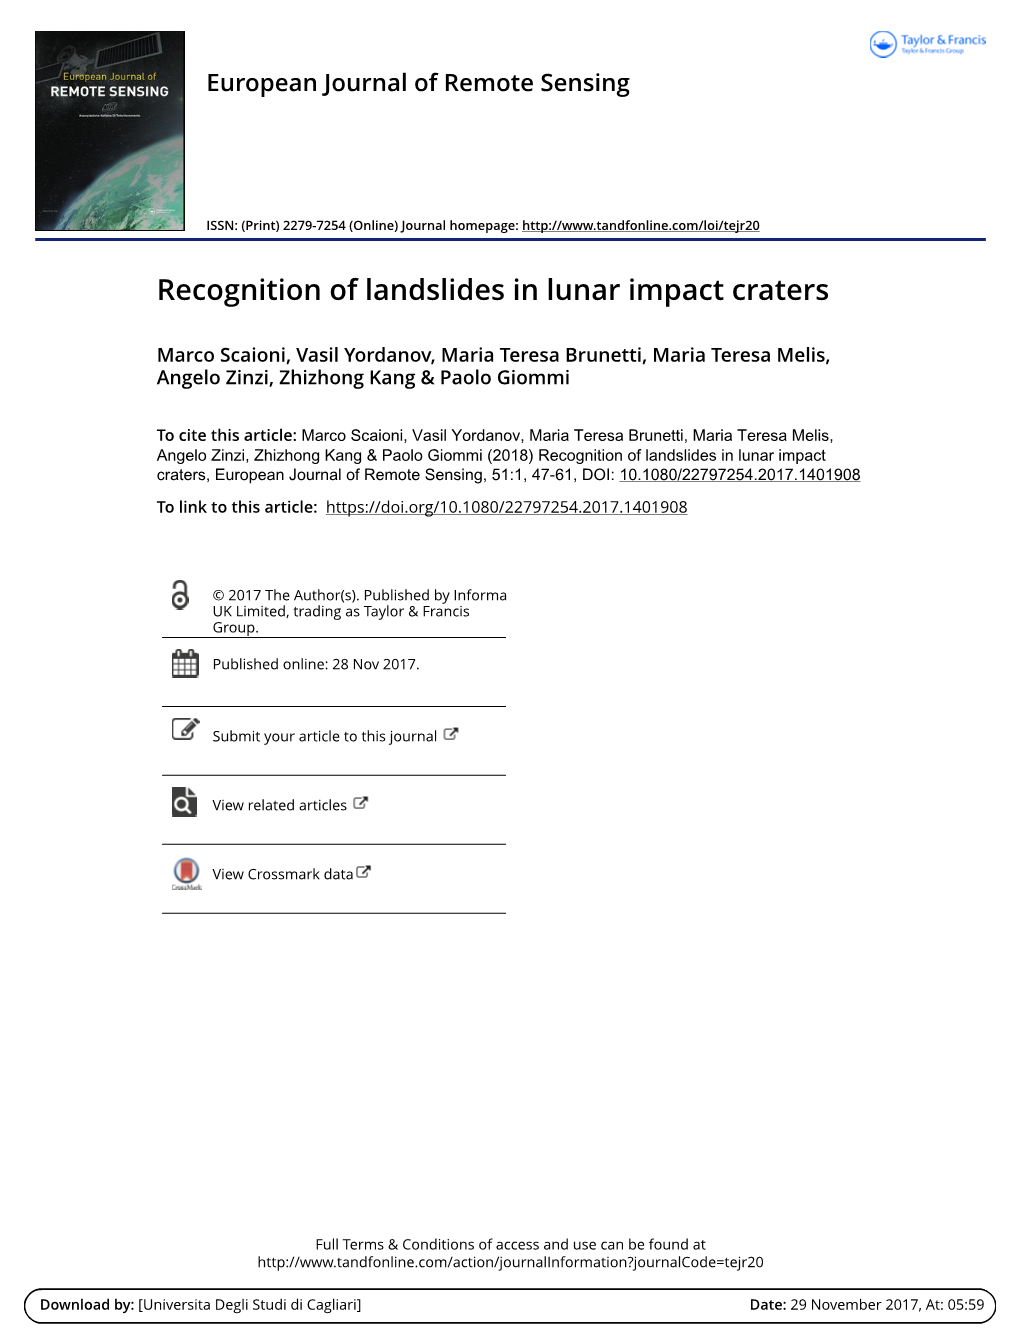 Recognition of Landslides in Lunar Impact Craters